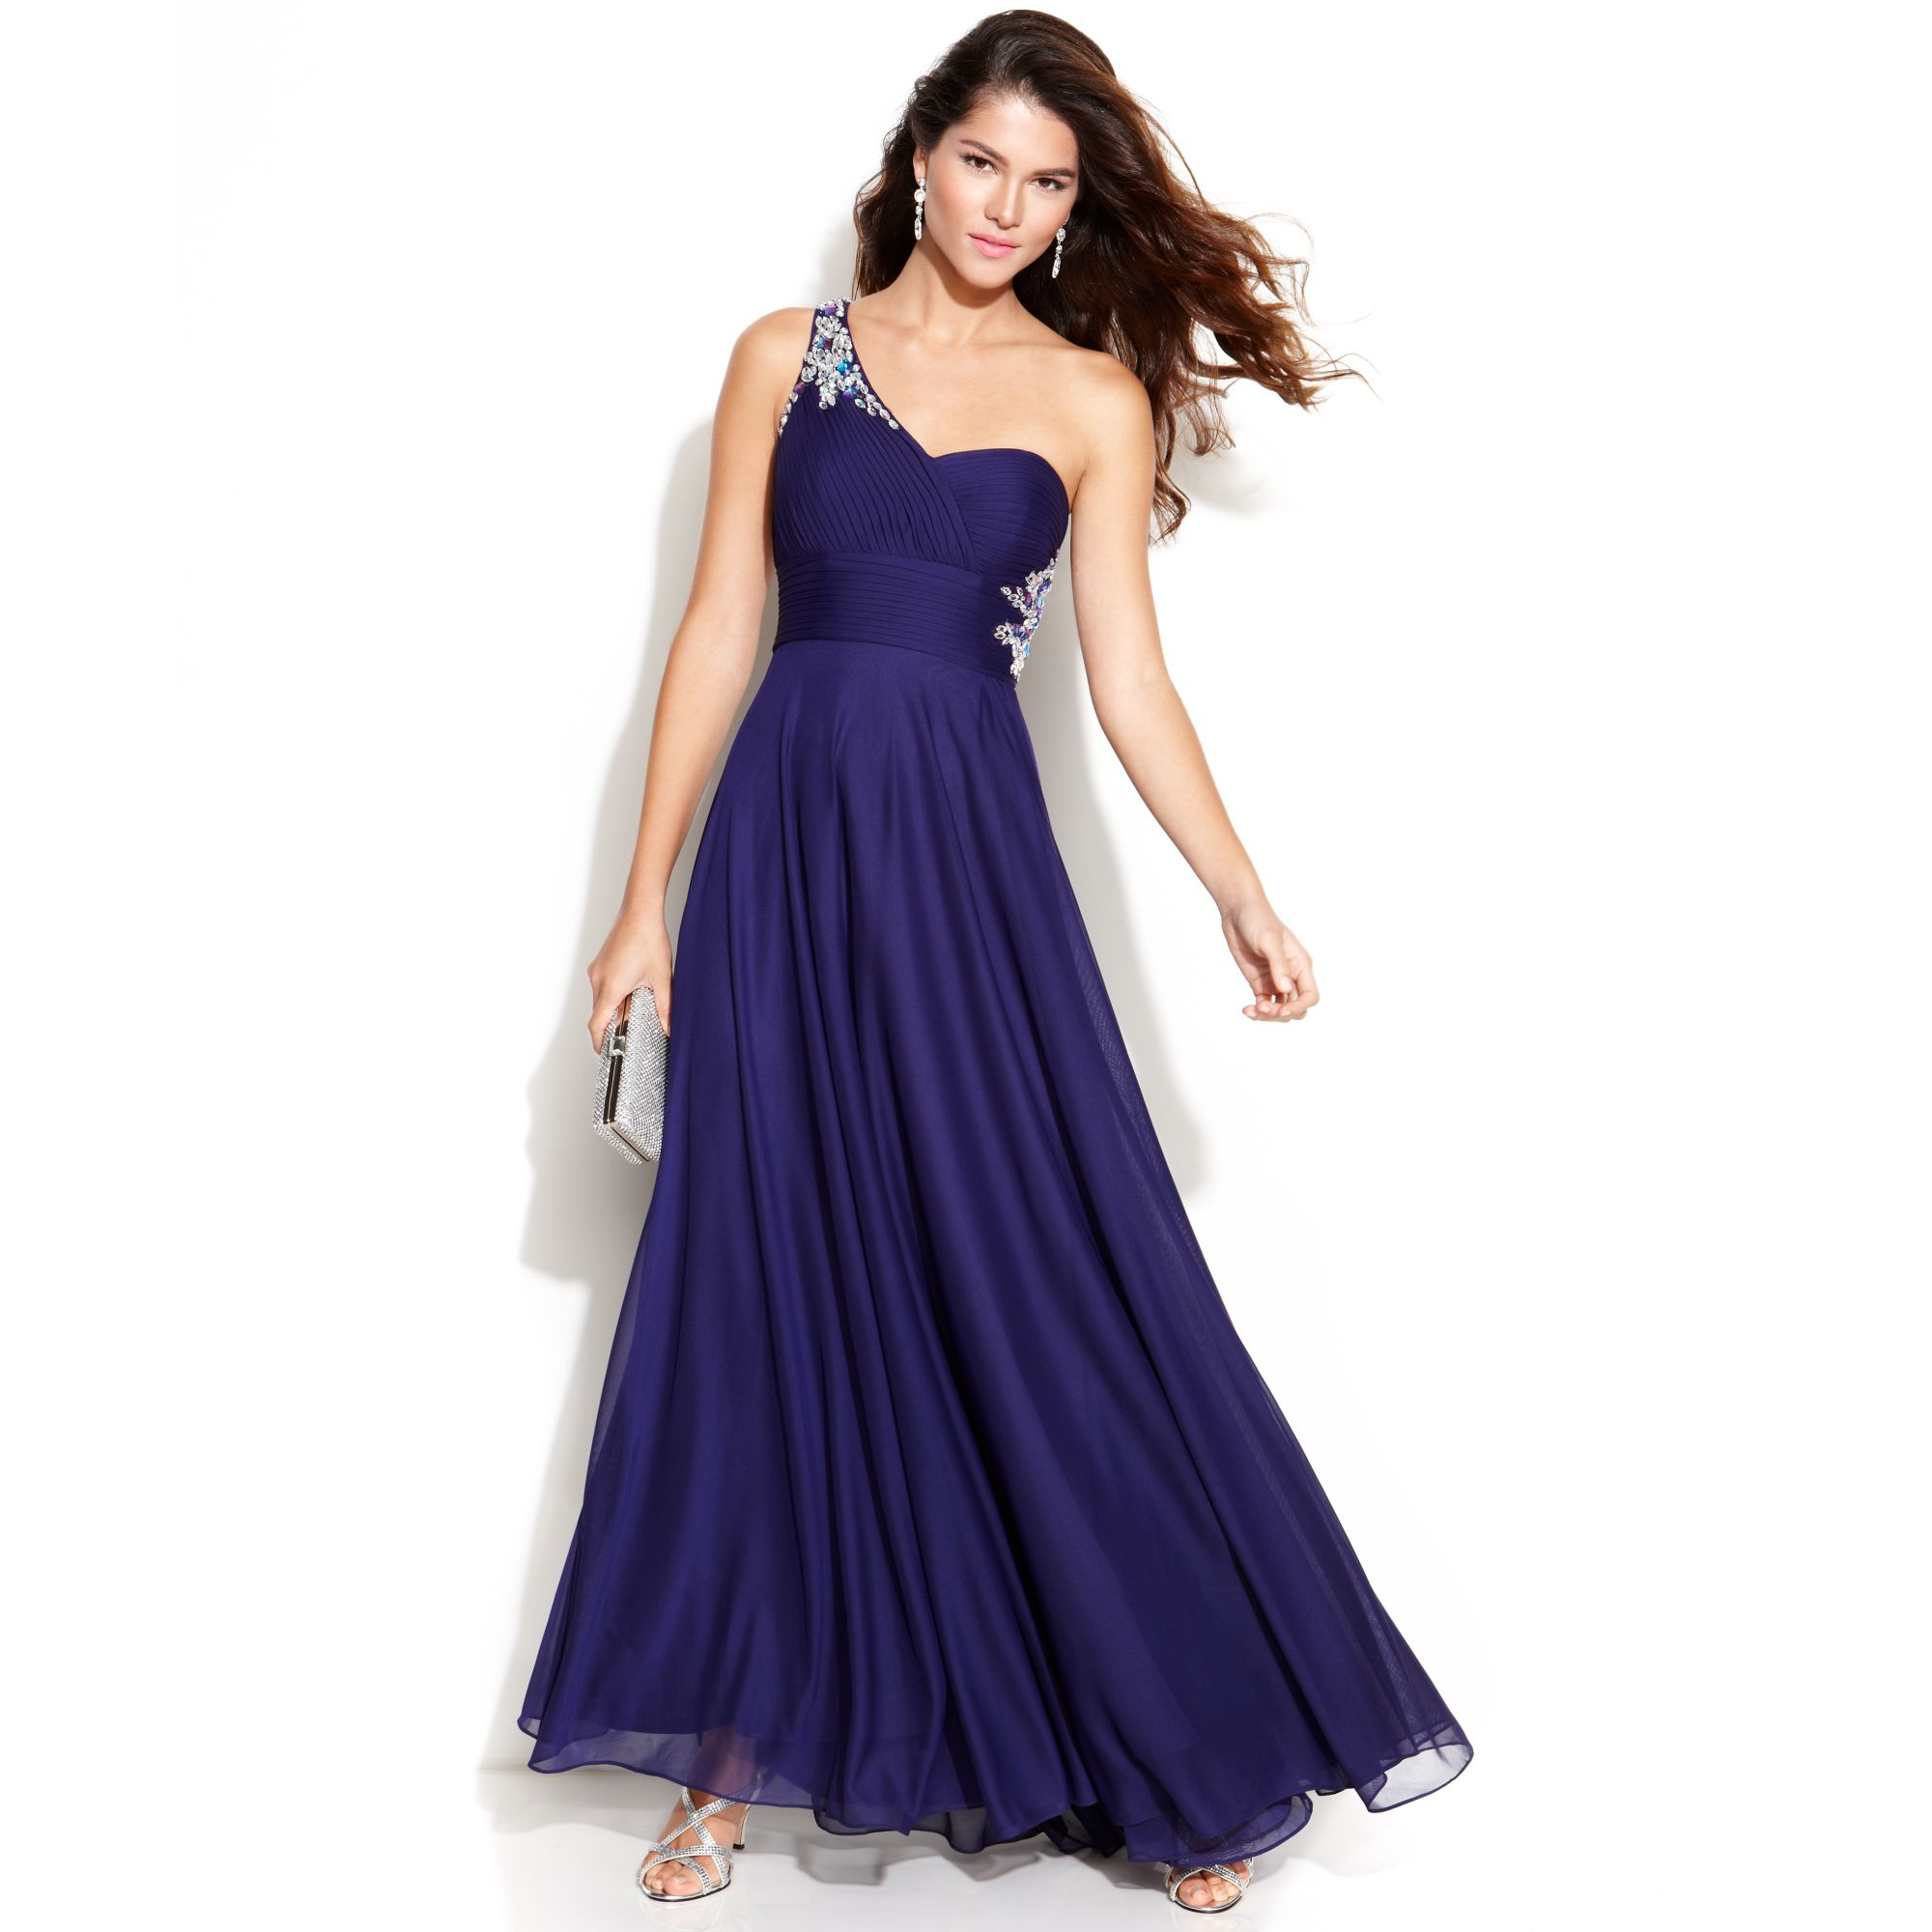 Xscape Oneshoulder Embellished Cutout Gown in Purple (Iris)